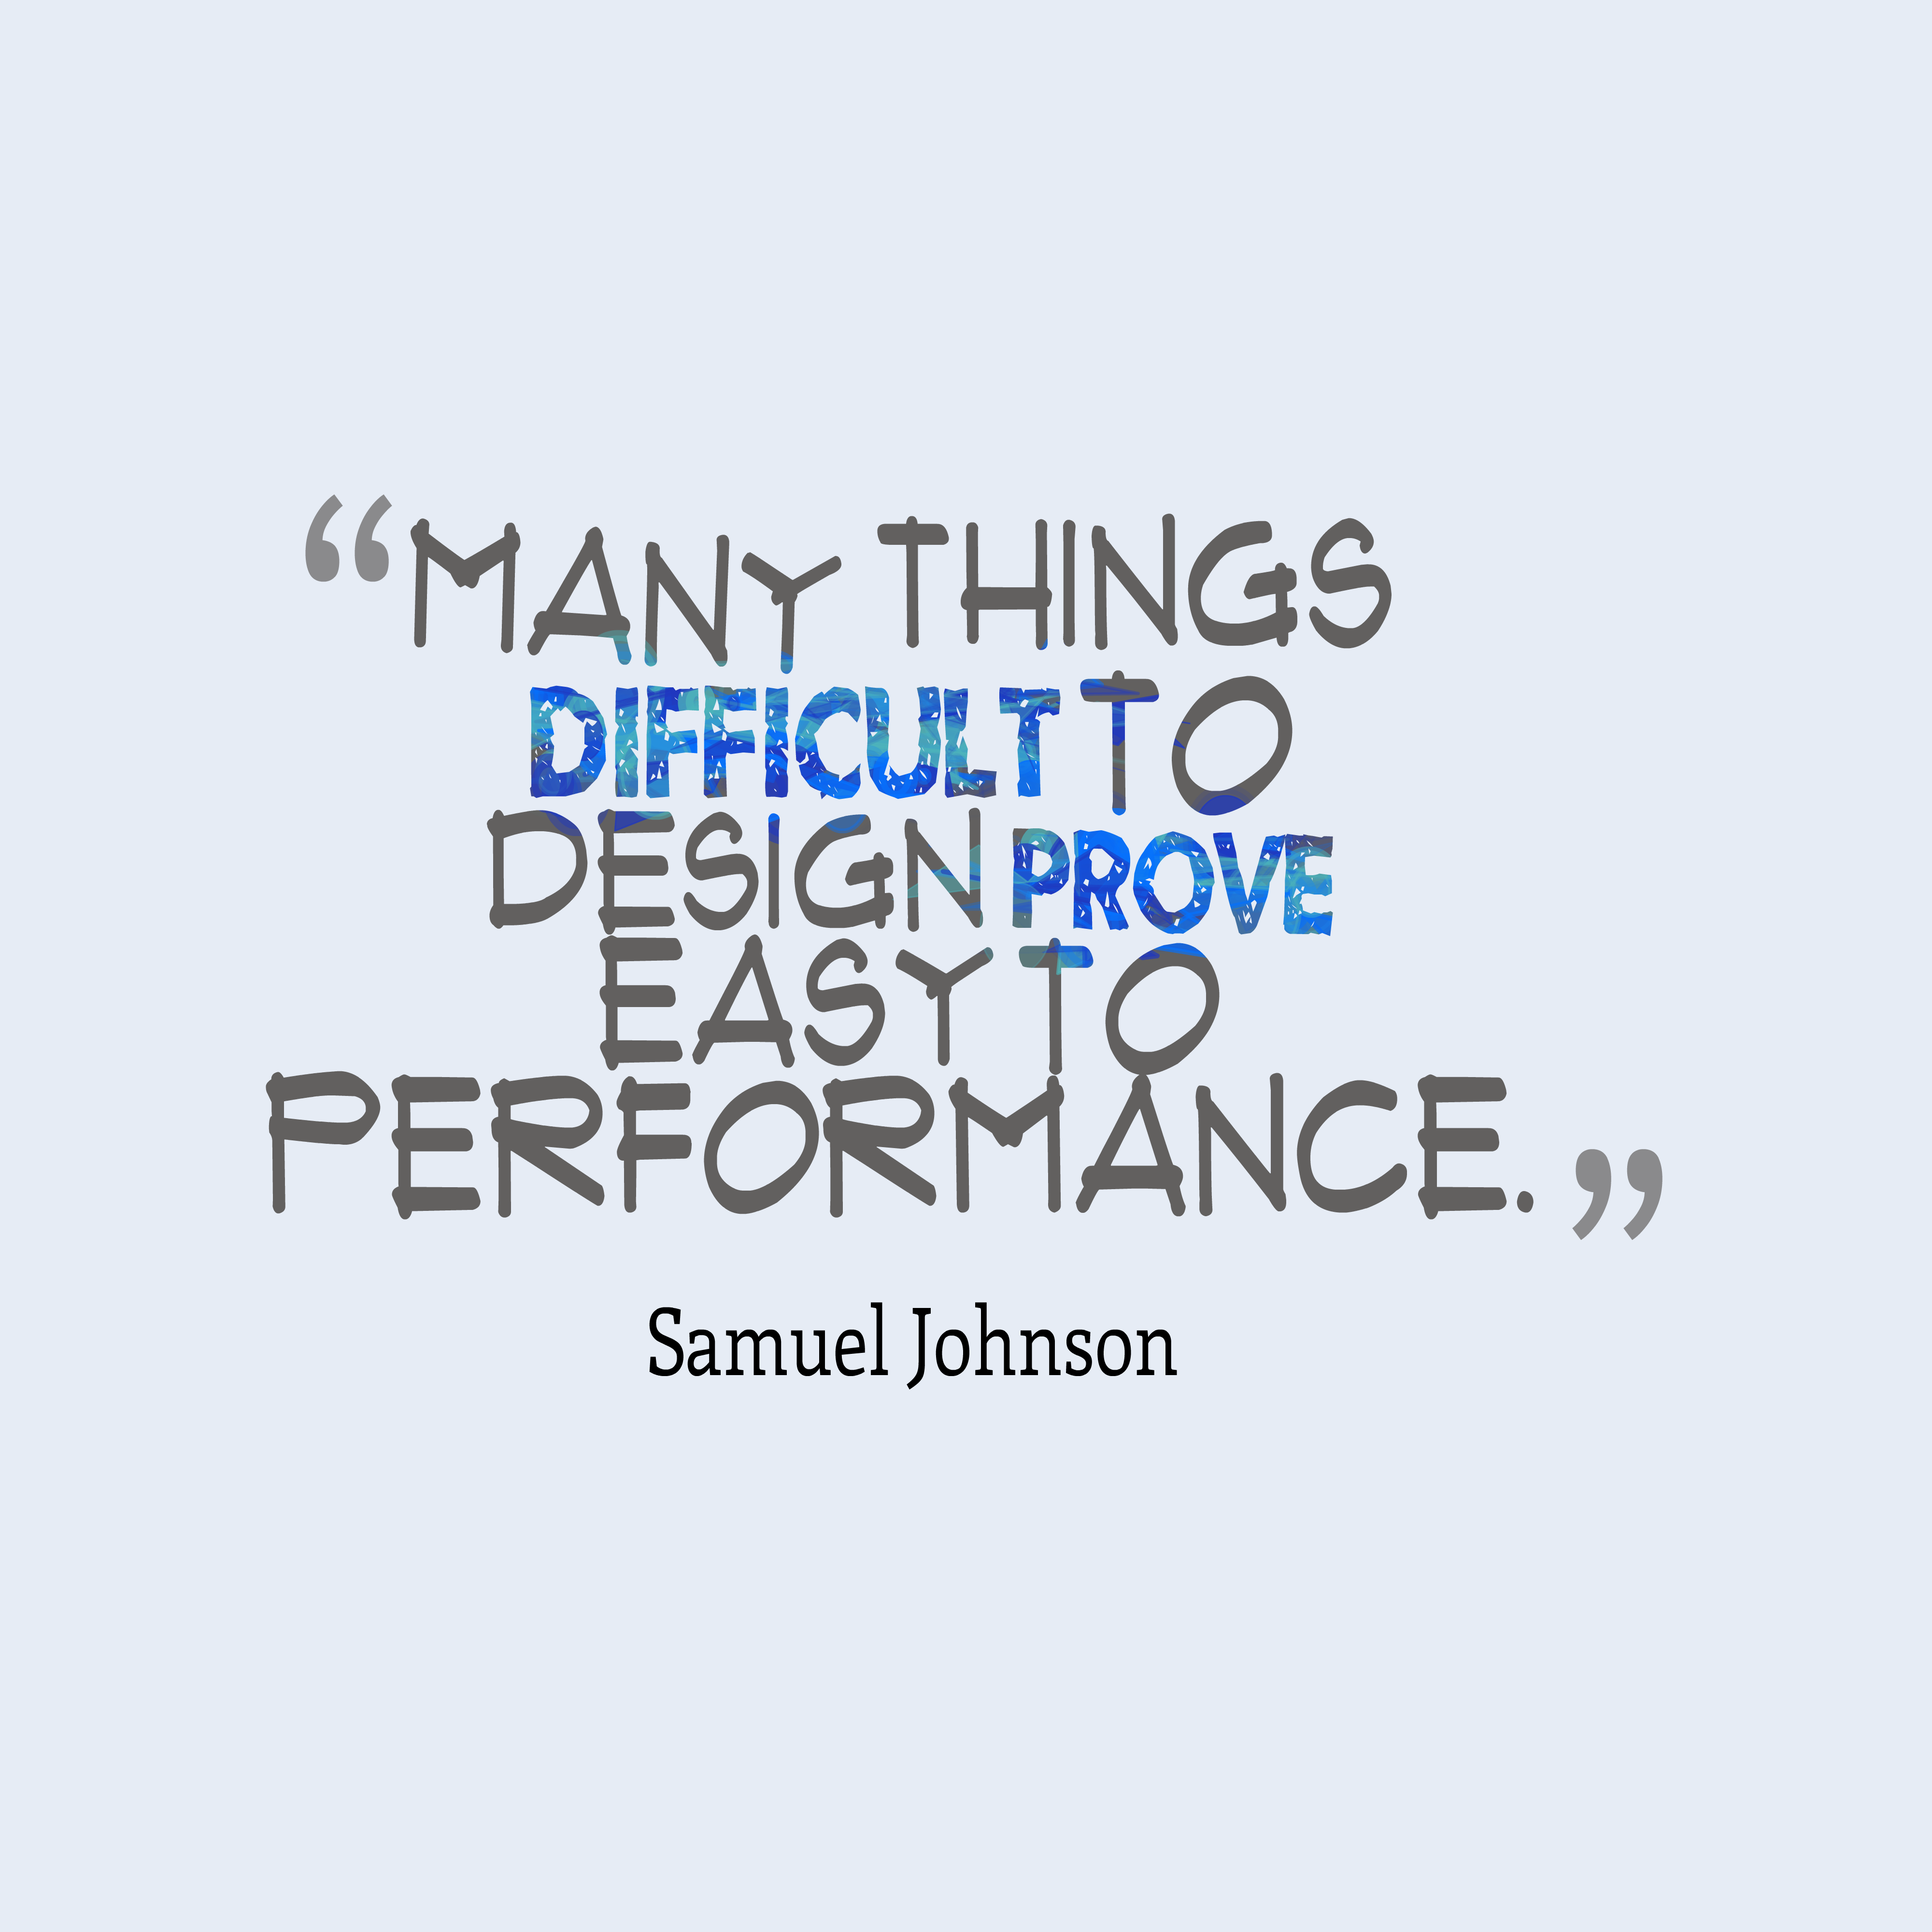 Many things difficult to design prove easy to performance. Samuel Johnson